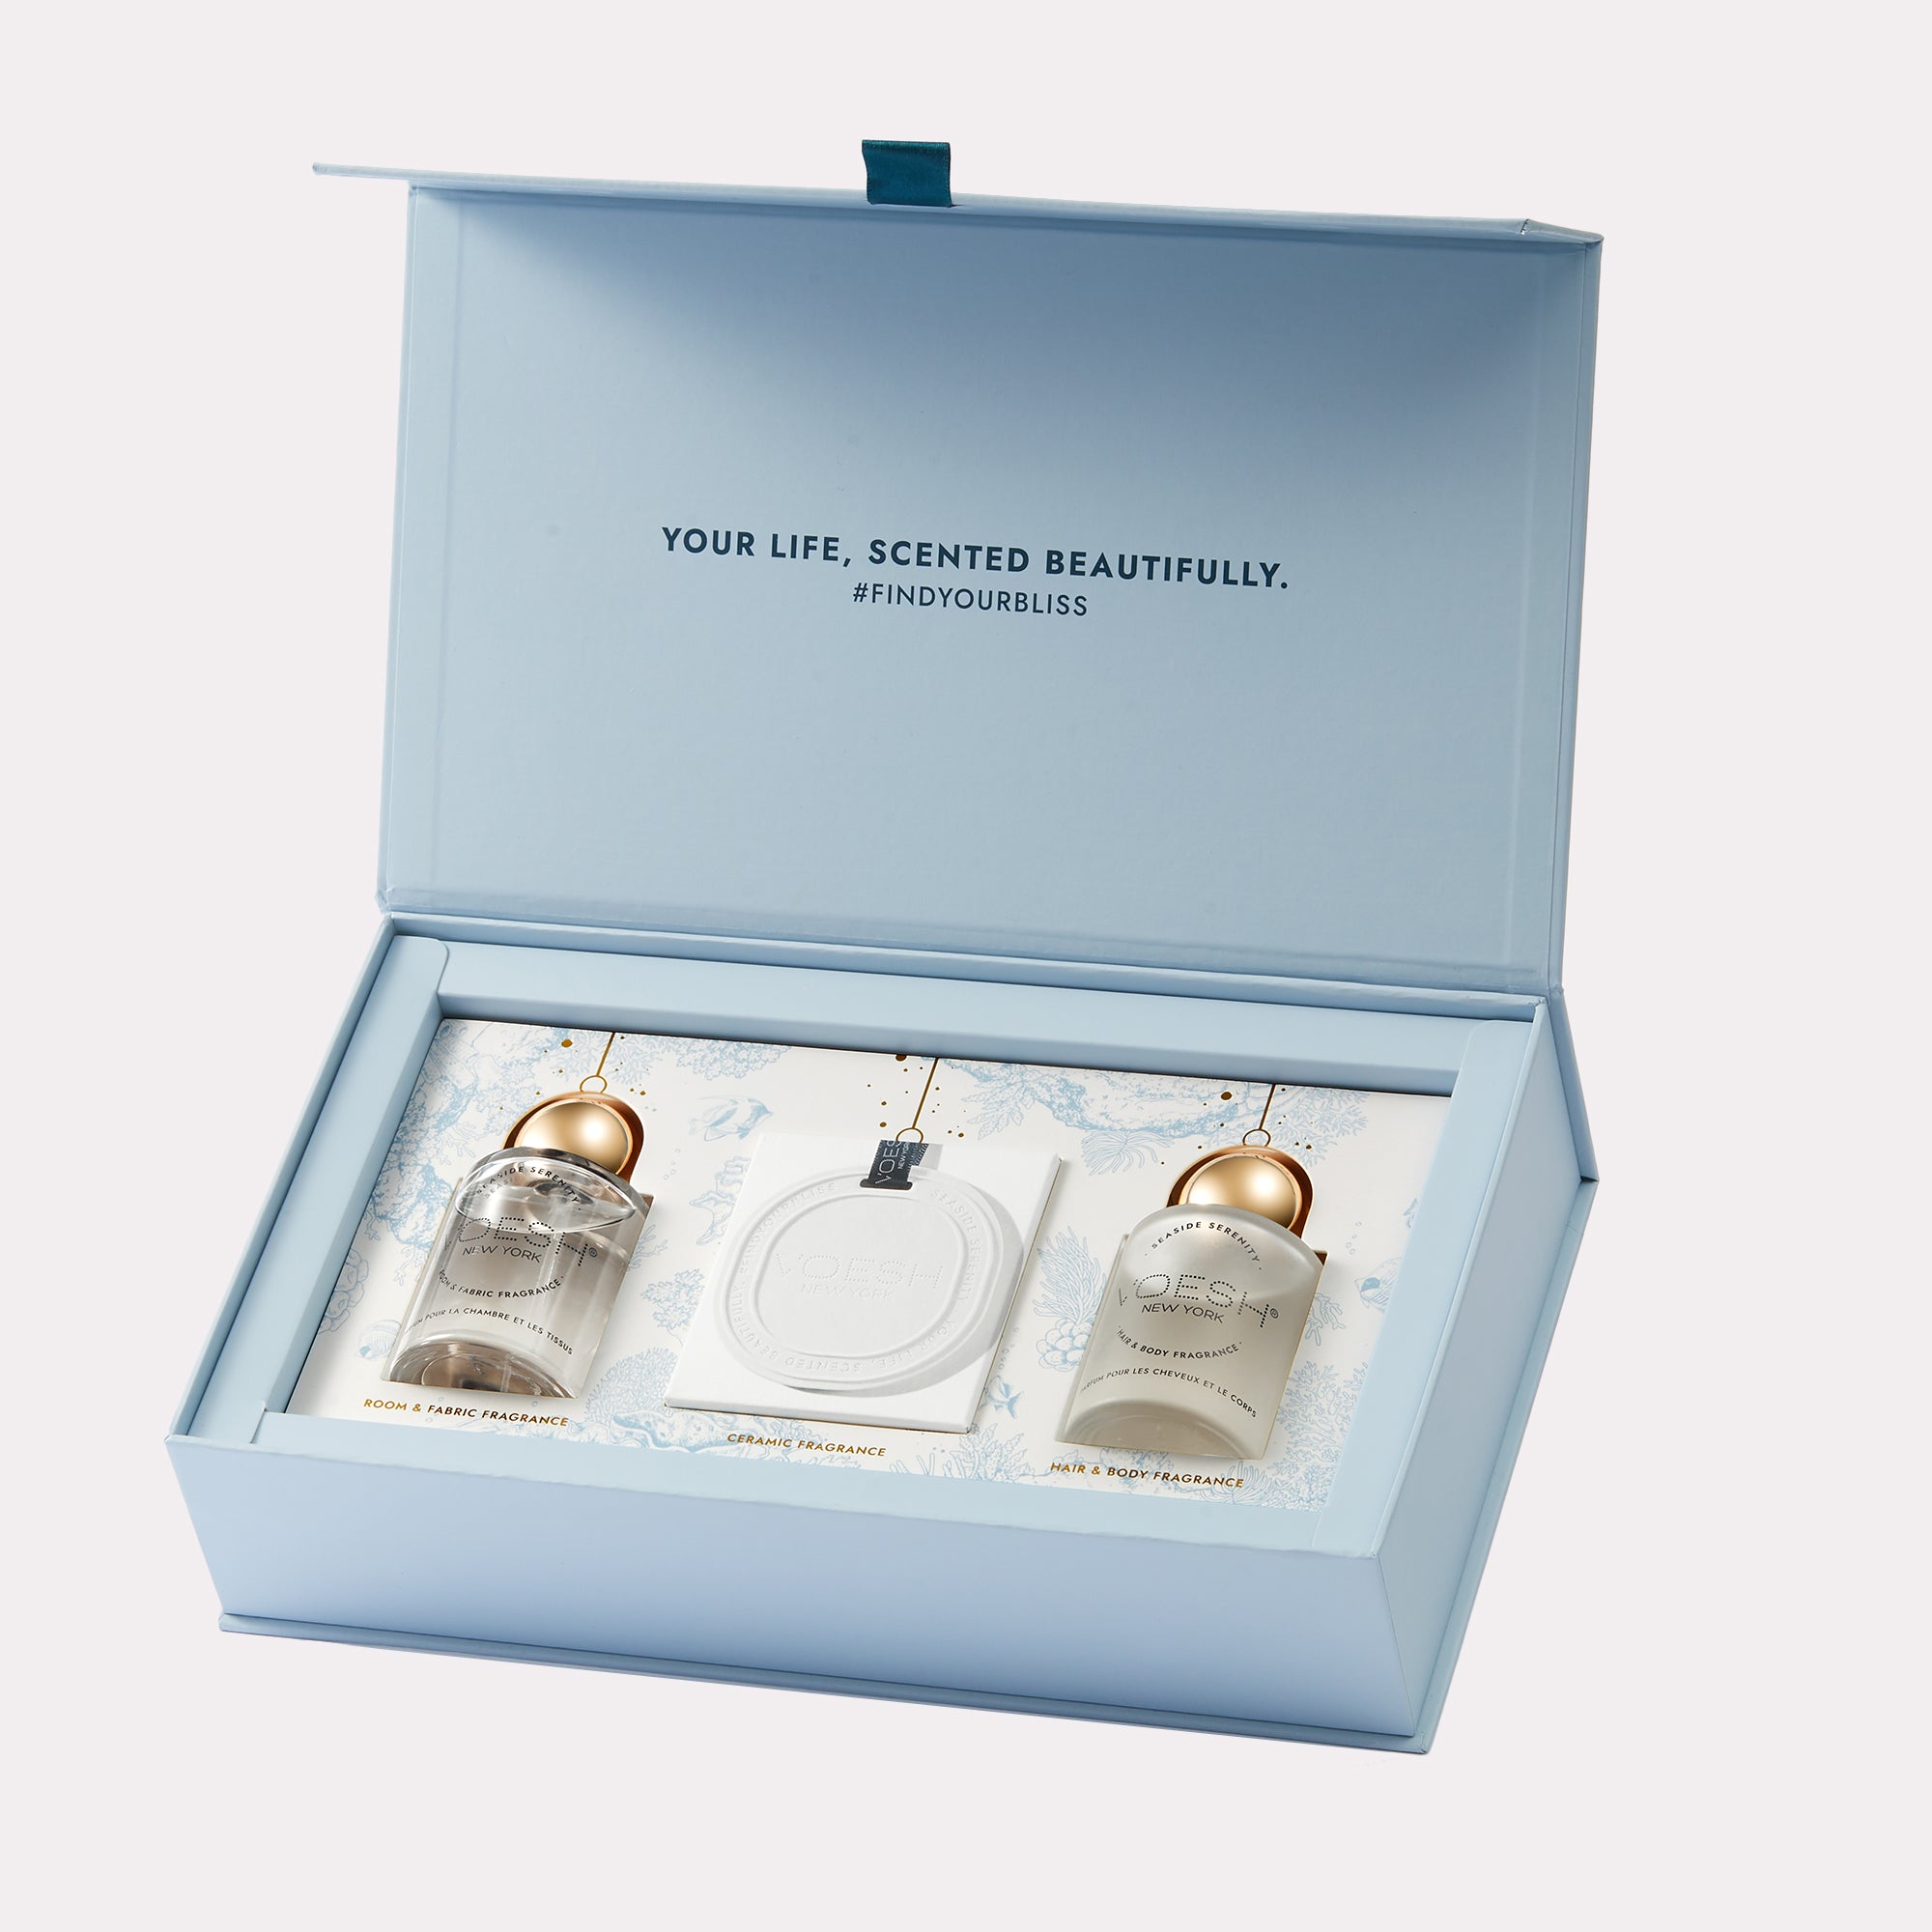 Seaside Serenity Fragrance Set box open to showcase the three fragrances inside, pictured on a white background.